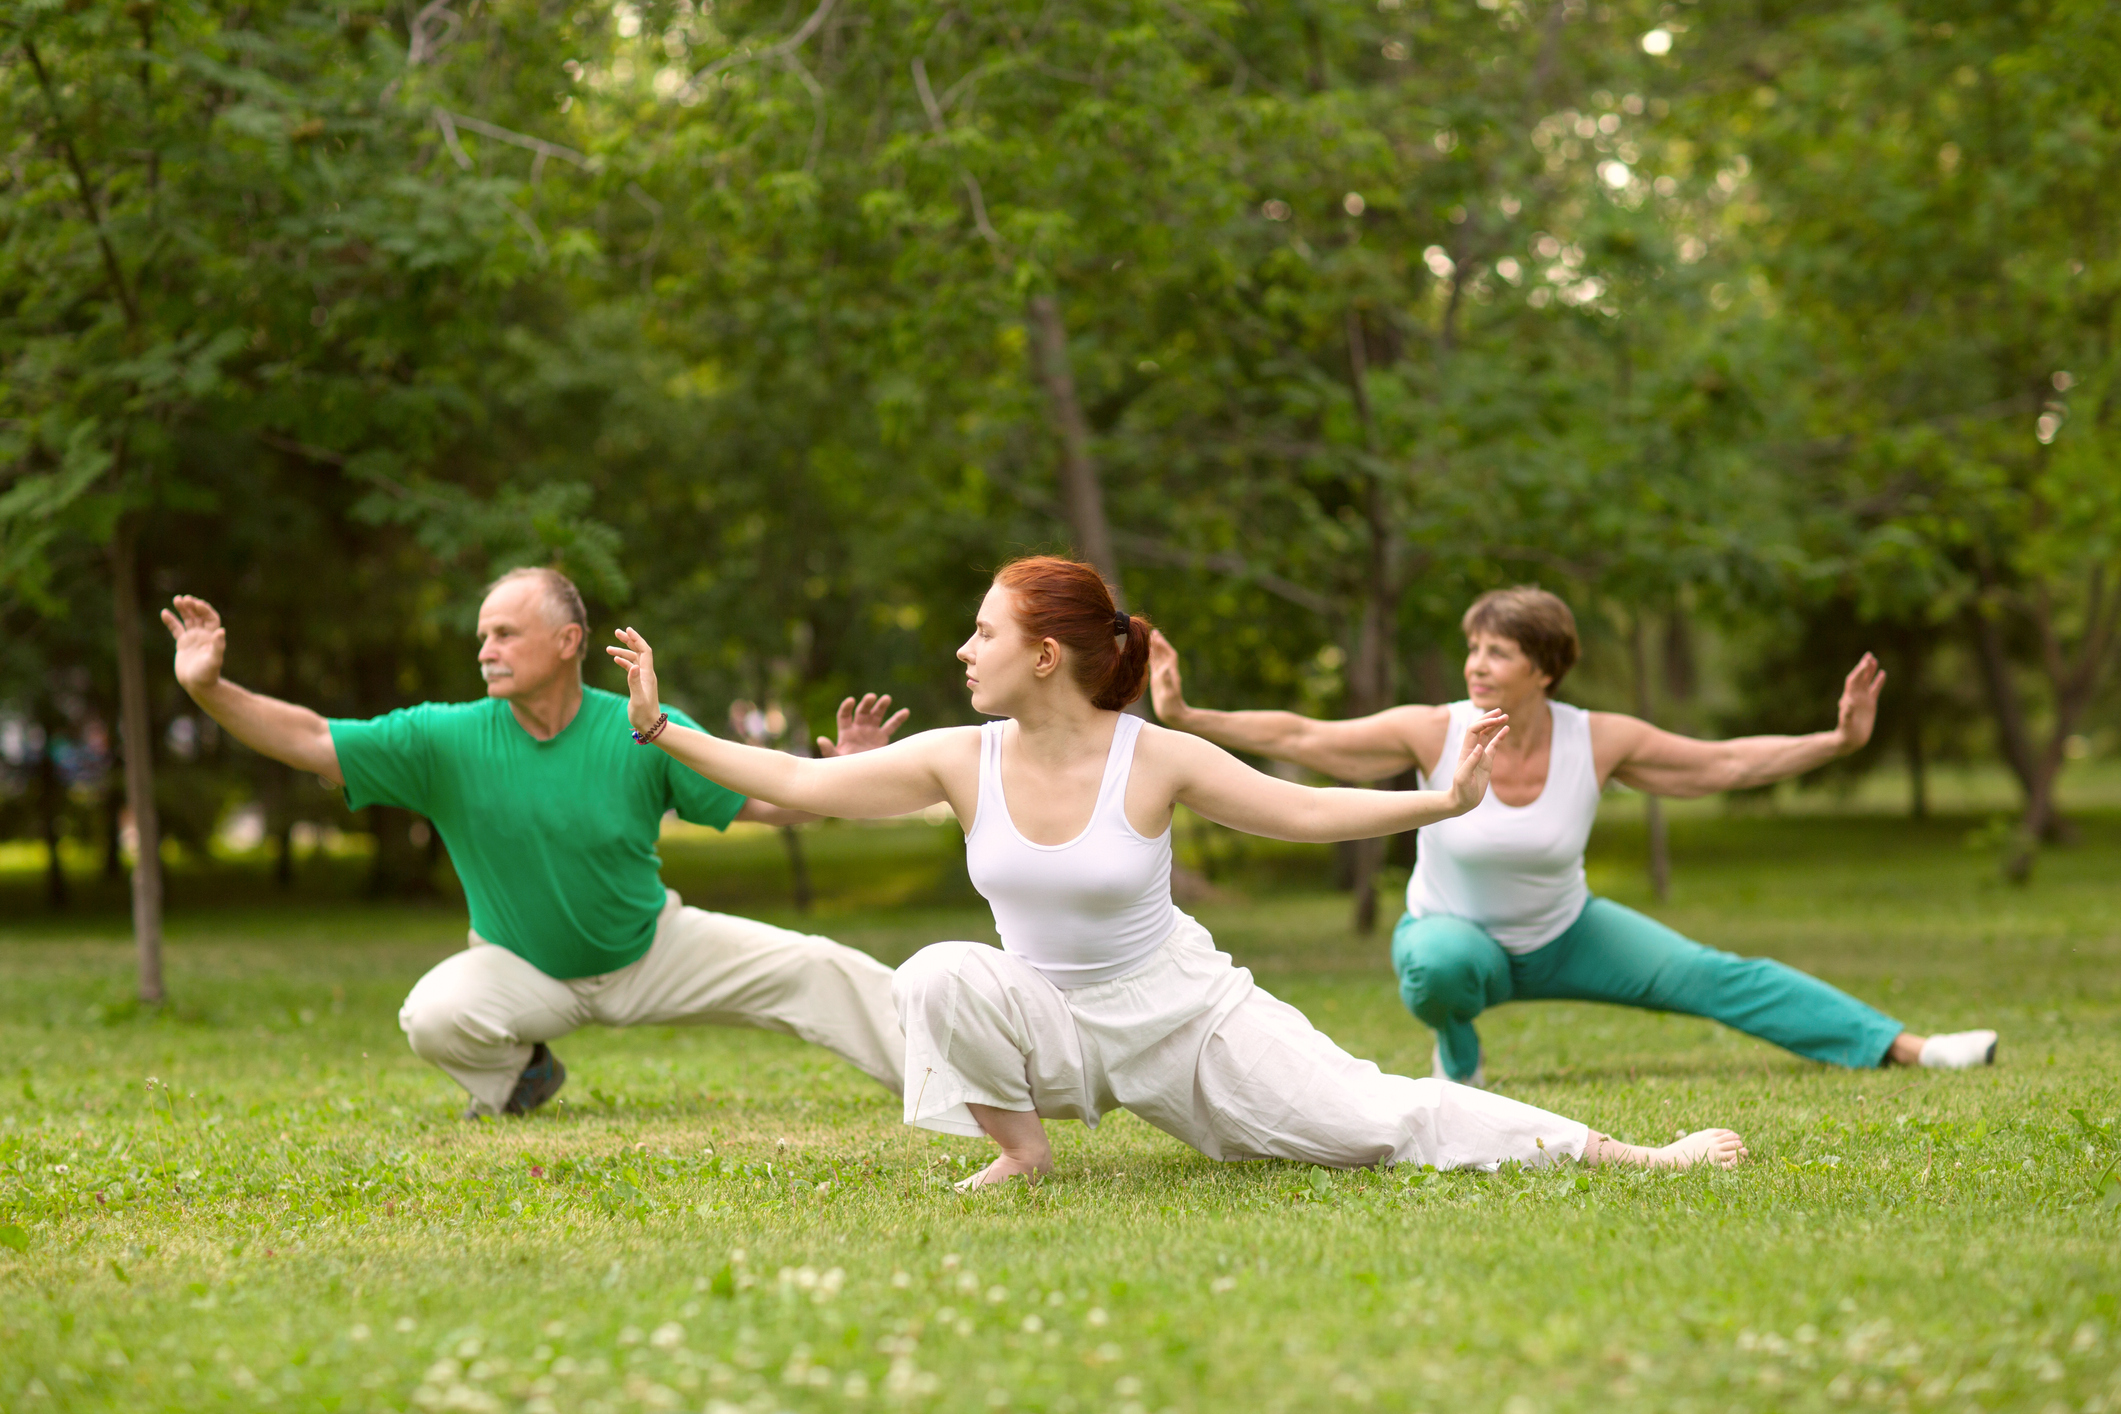 people practicing tai chi in a park or green open space